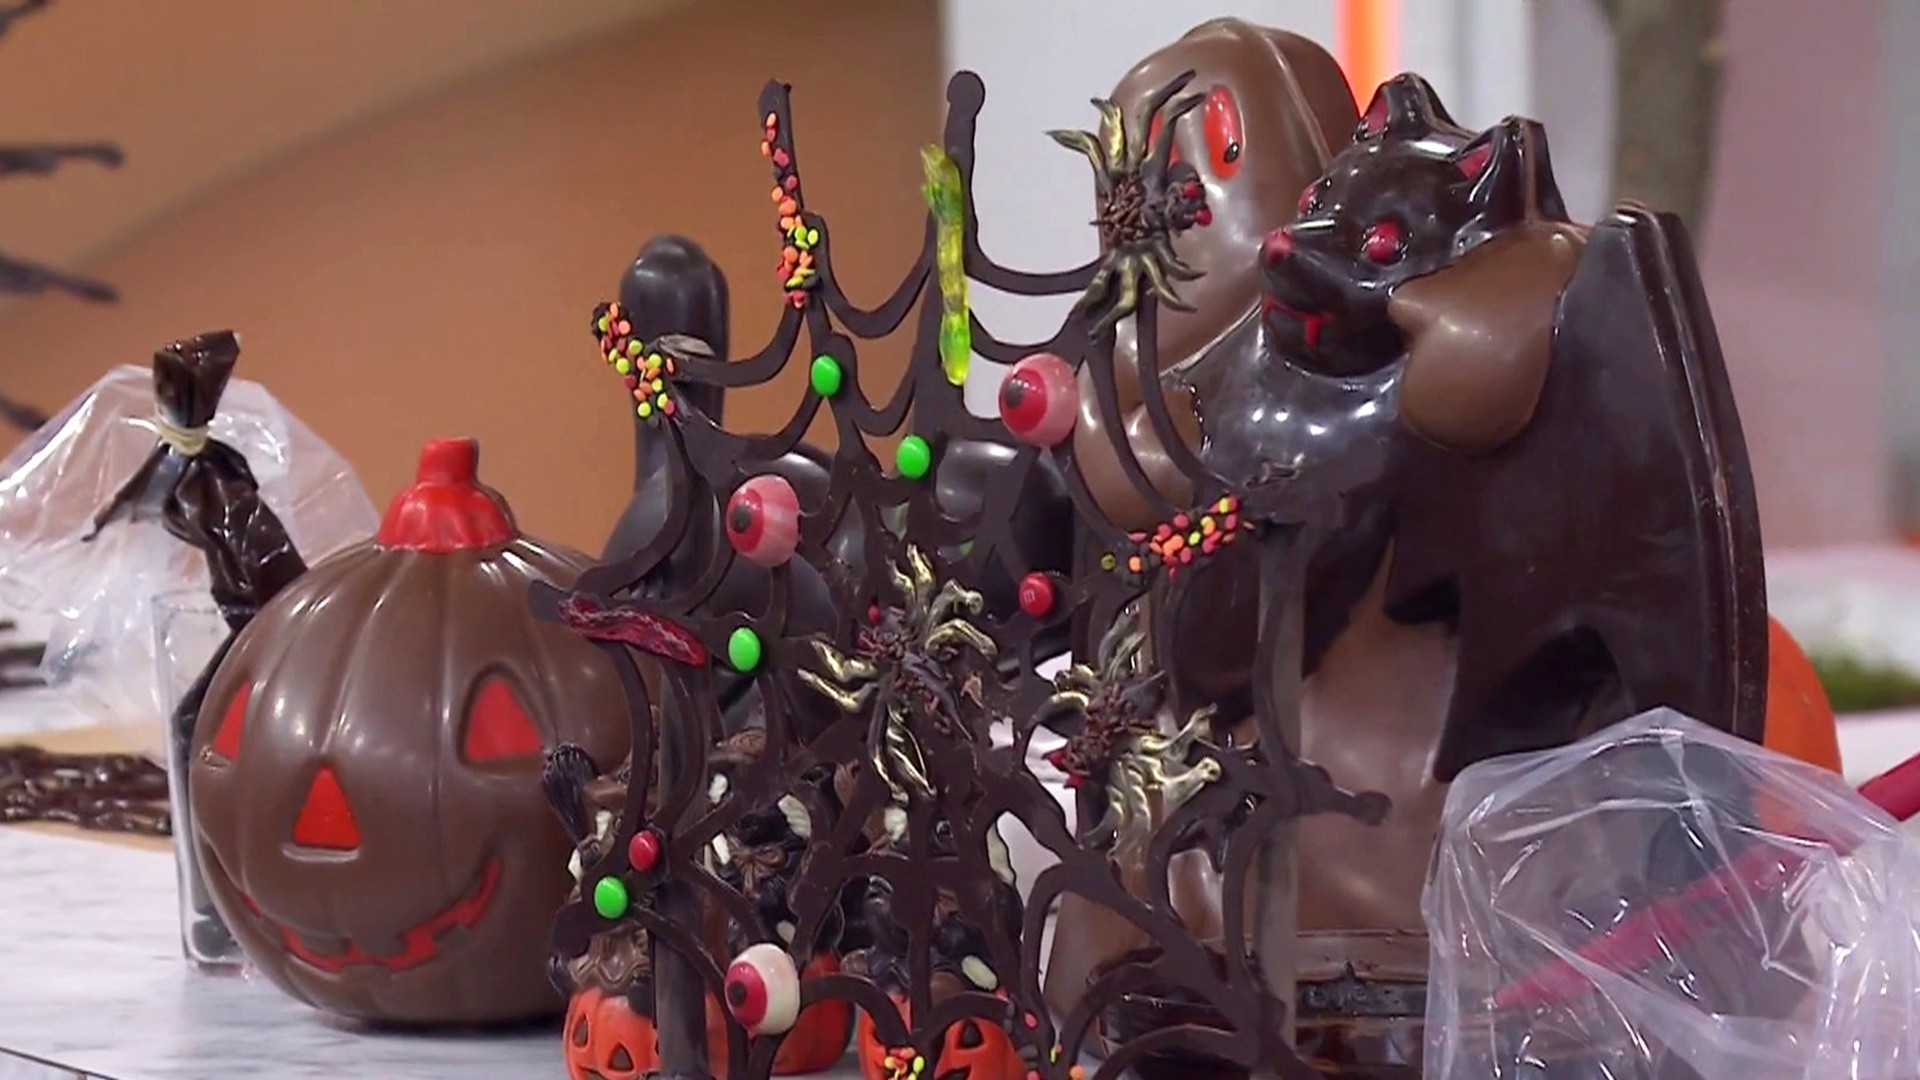 Jacques Torres shows how to make chocolate Halloween treats